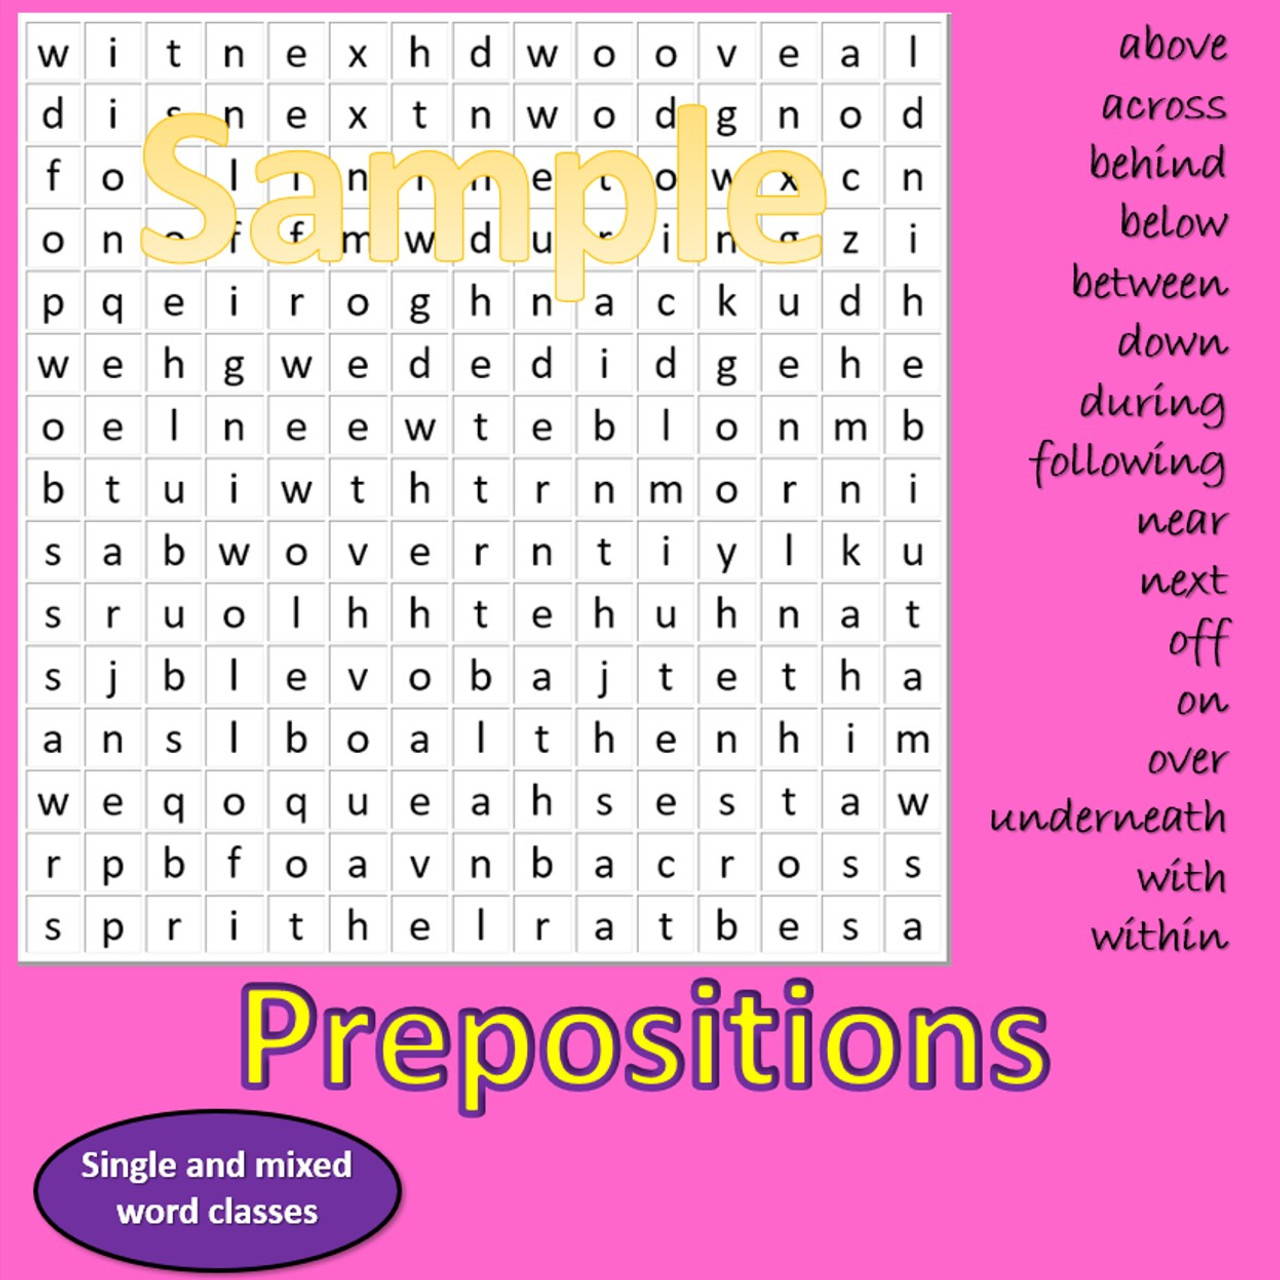 Word Classifications - 7 Word Searches exploring different word classifications